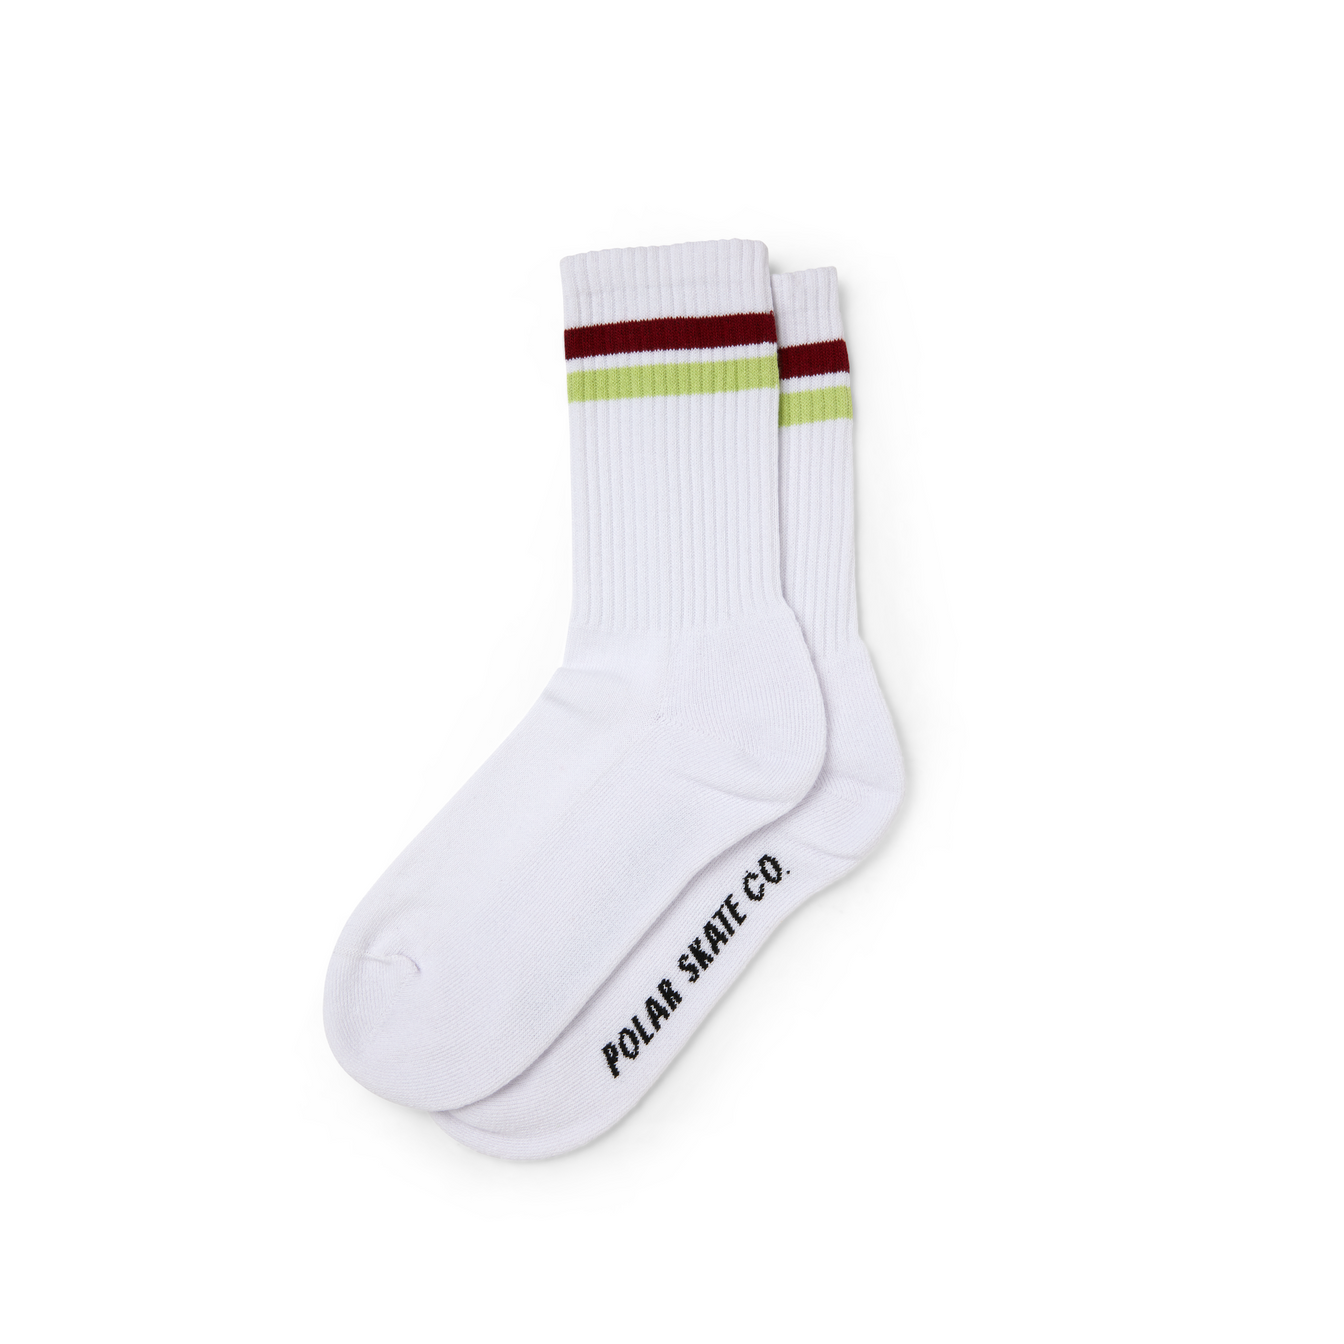 Stripe Socks - White/Rich Red/Chartreuse